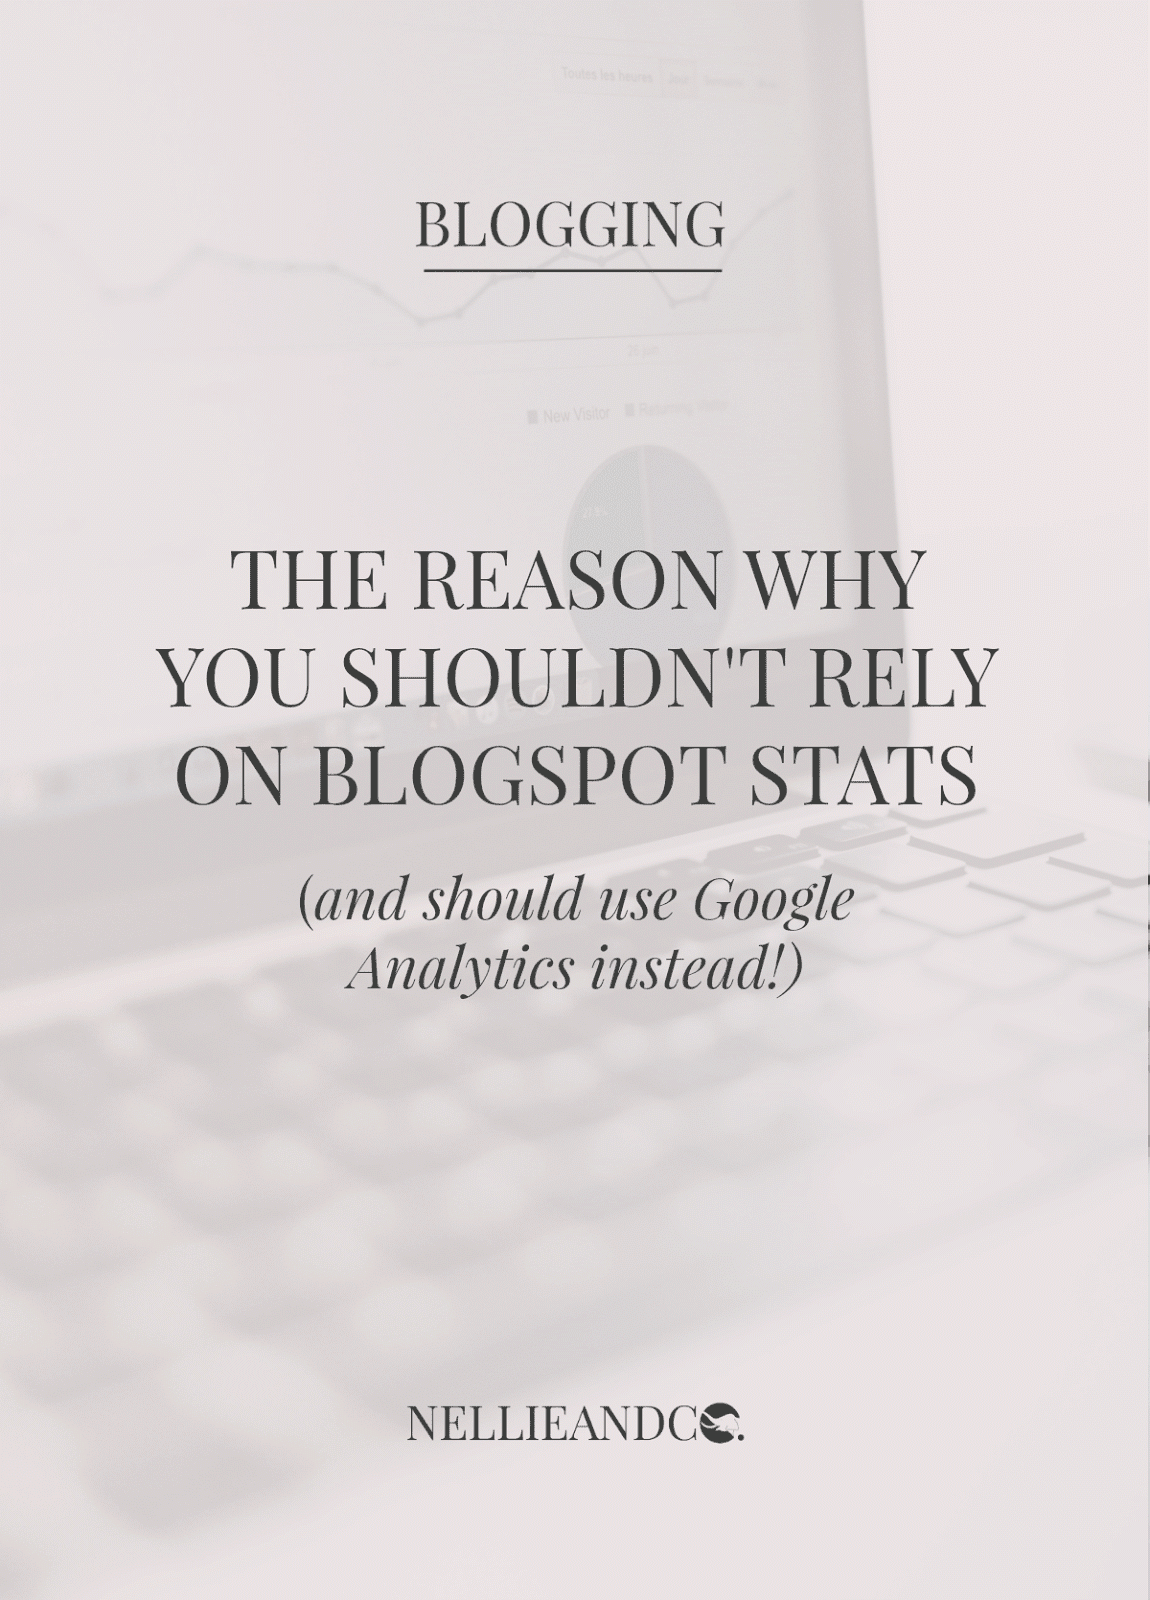 If you're a Blogspot user, you might be in for a nasty shock when you realise your statistics are wrong. Combat these false facts by using Google Analytics, and here's how!